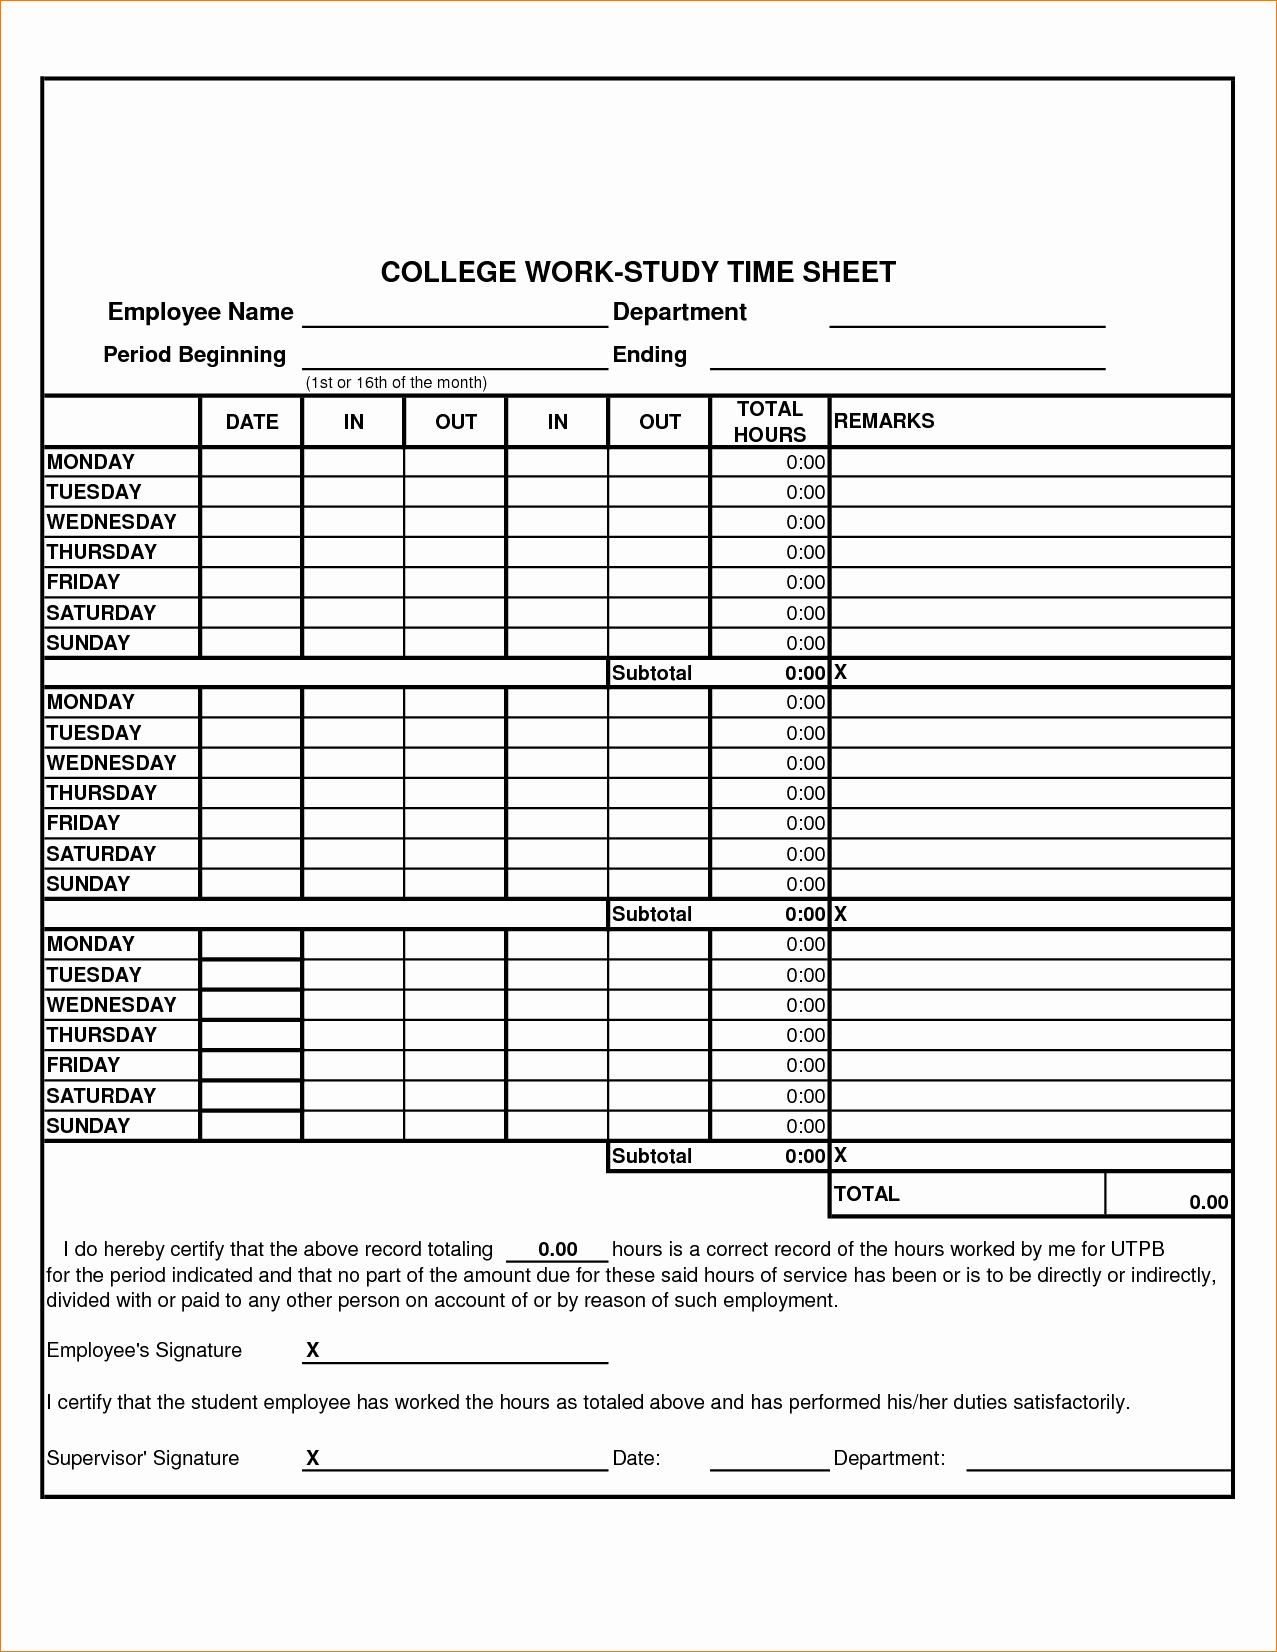 Employee Time Study Template Lovely 4 Work Time Sheet Timeline Template Logs